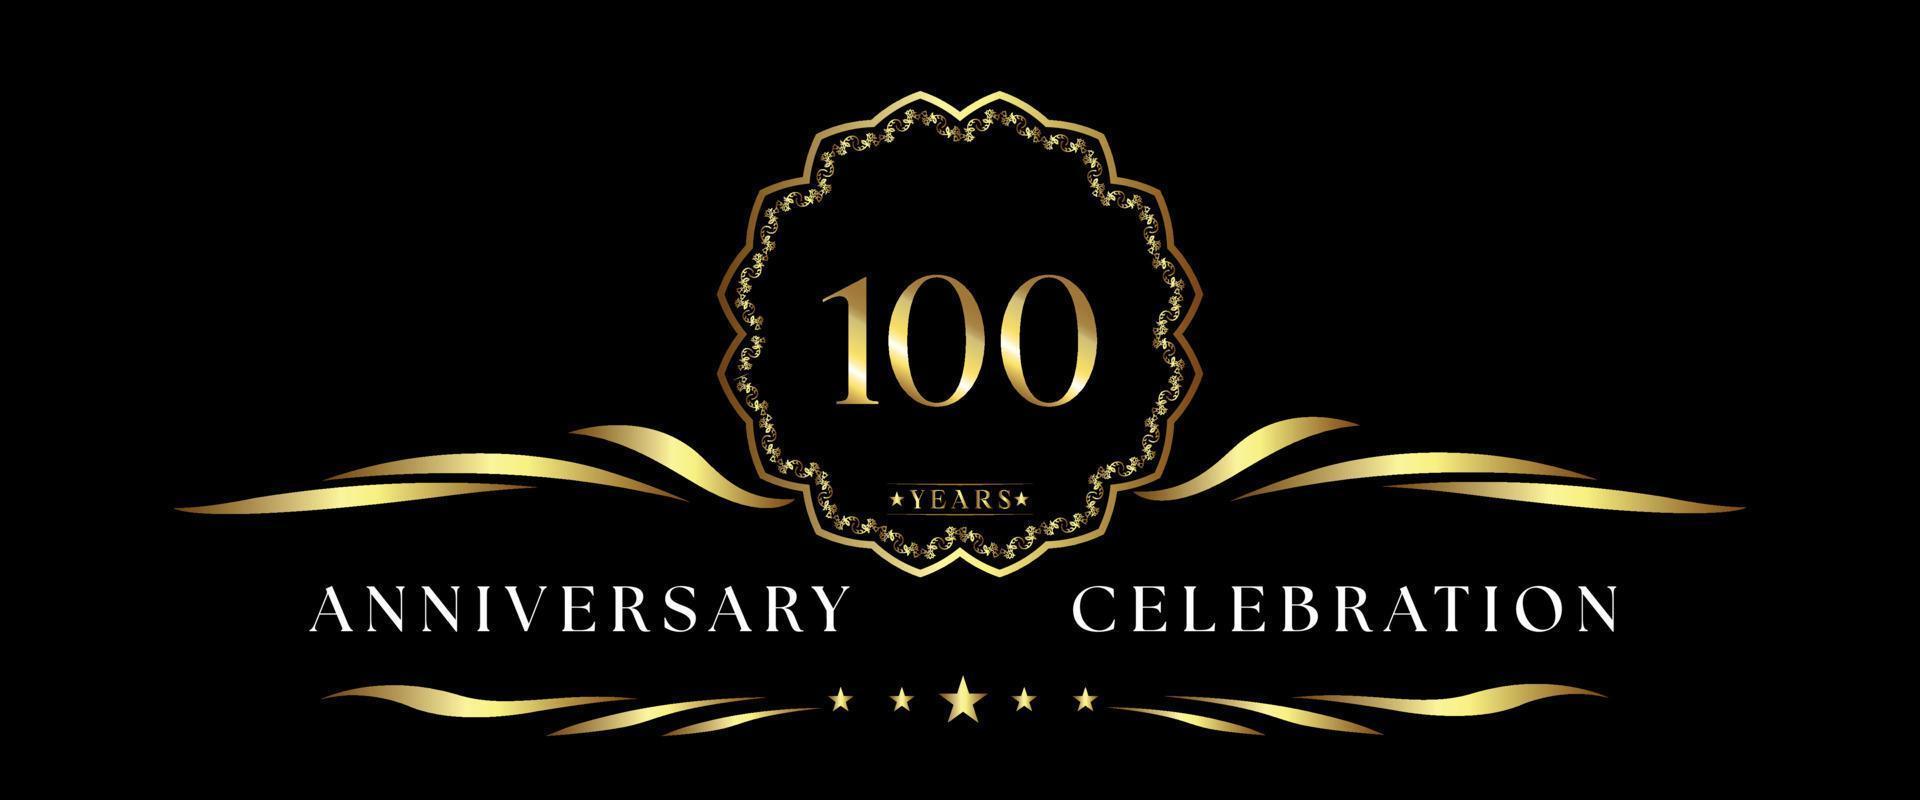 100 years anniversary celebration with gold decorative frame isolated on black background. Vector design for greeting card, birthday party, wedding, event party, ceremony. 100 years Anniversary logo.